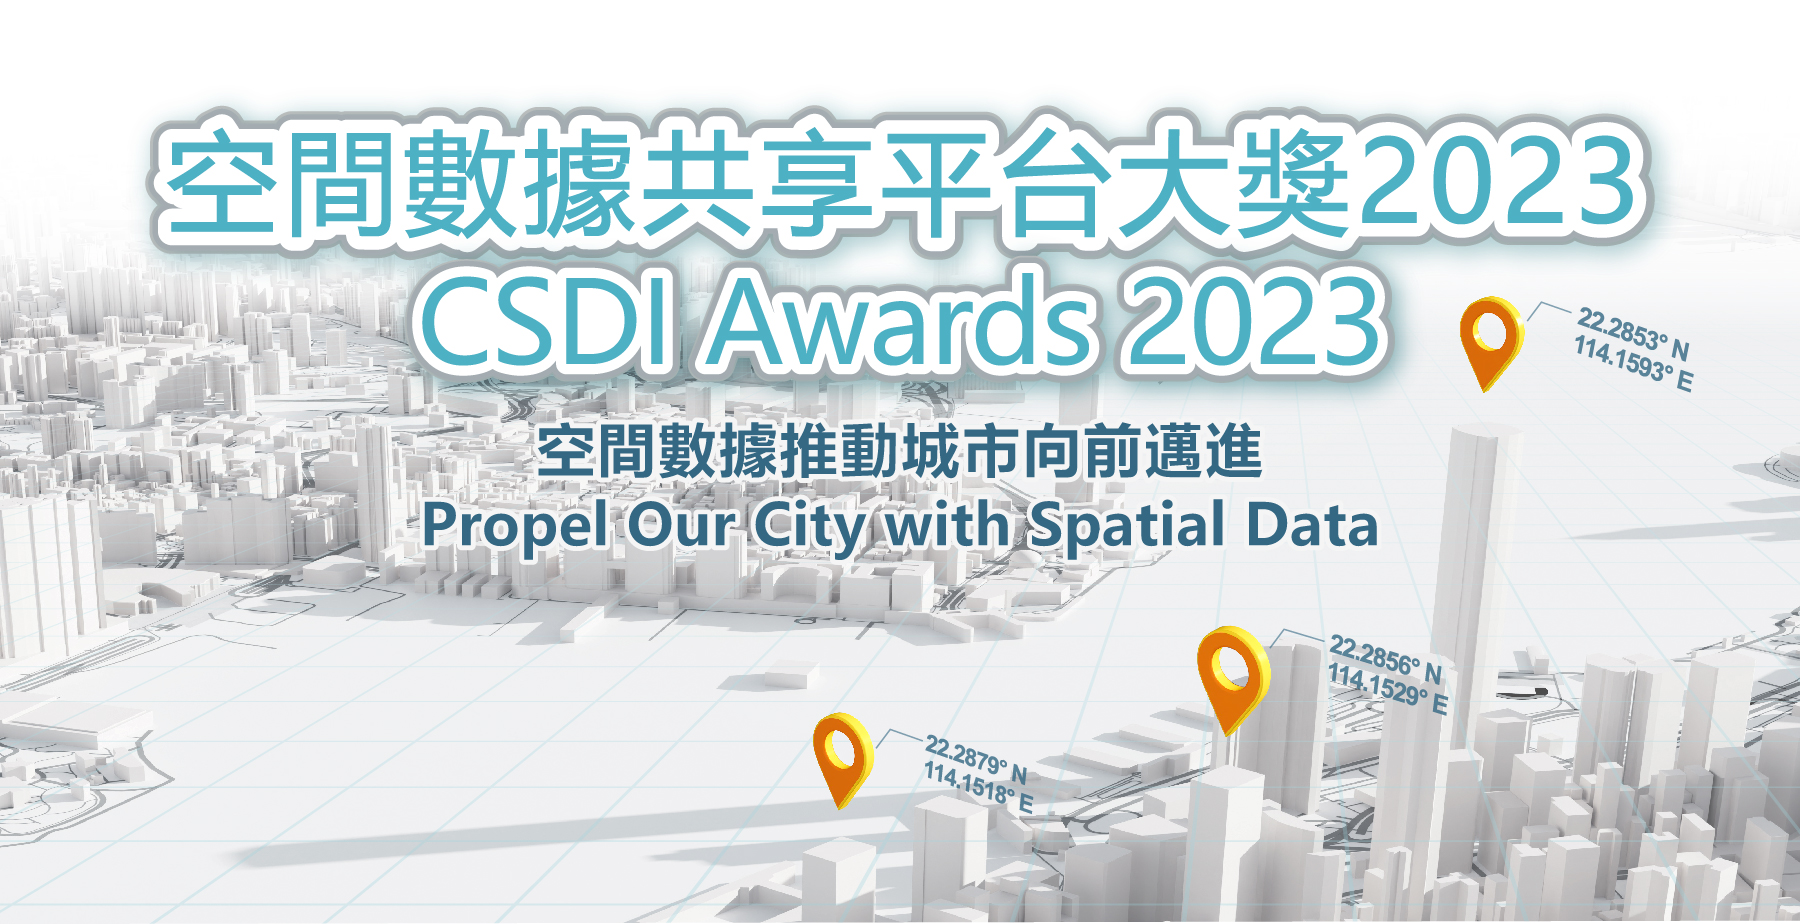 CSDI Awards 2023 “Propel Our City with Spatial Data” Presentation Day and Awards Ceremony